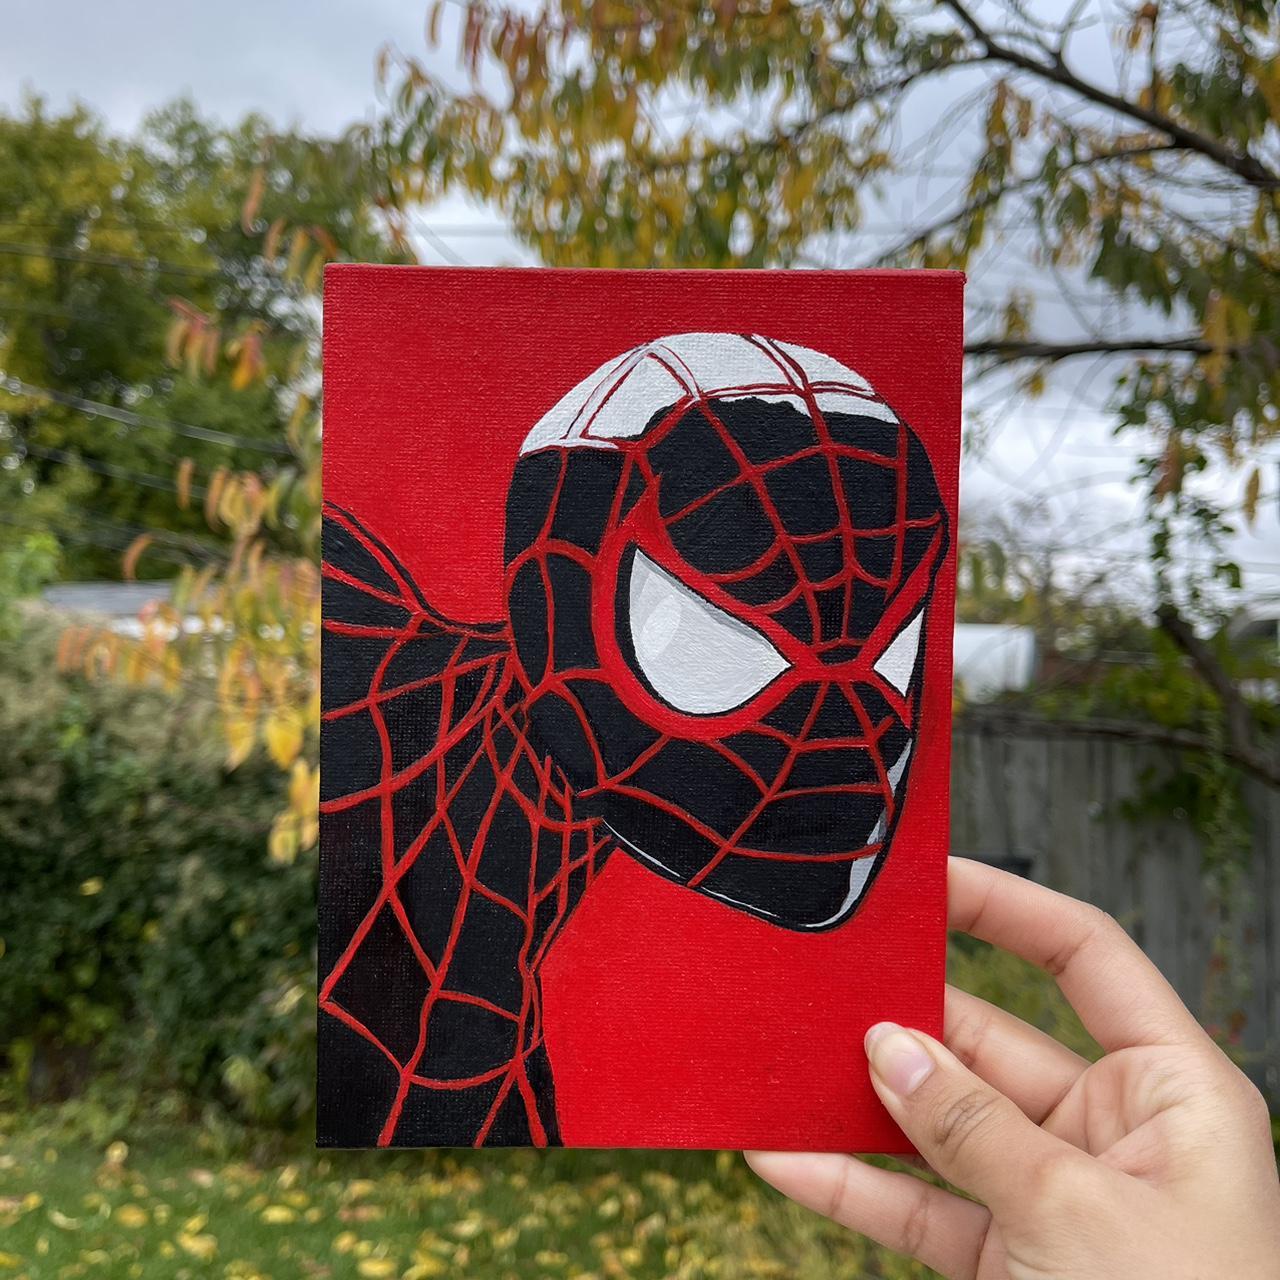 🕸️ Spider-Man and Hello Kitty couples or friends - Depop